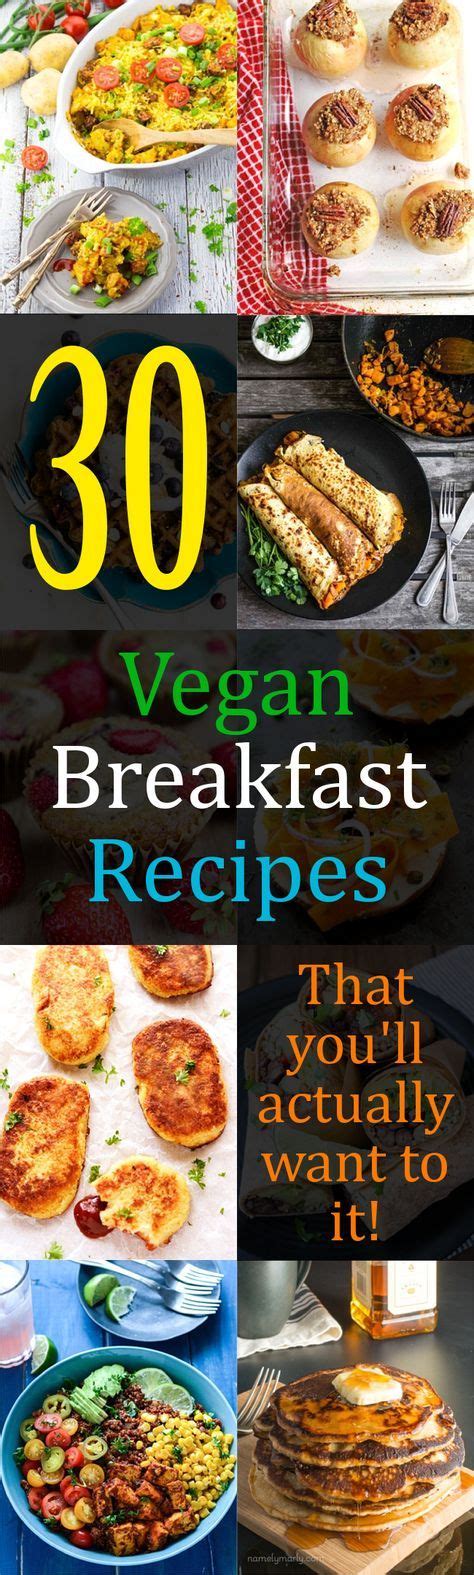 30 Vegan Breakfast Recipes That Youll Actually Want To Eat Vegan